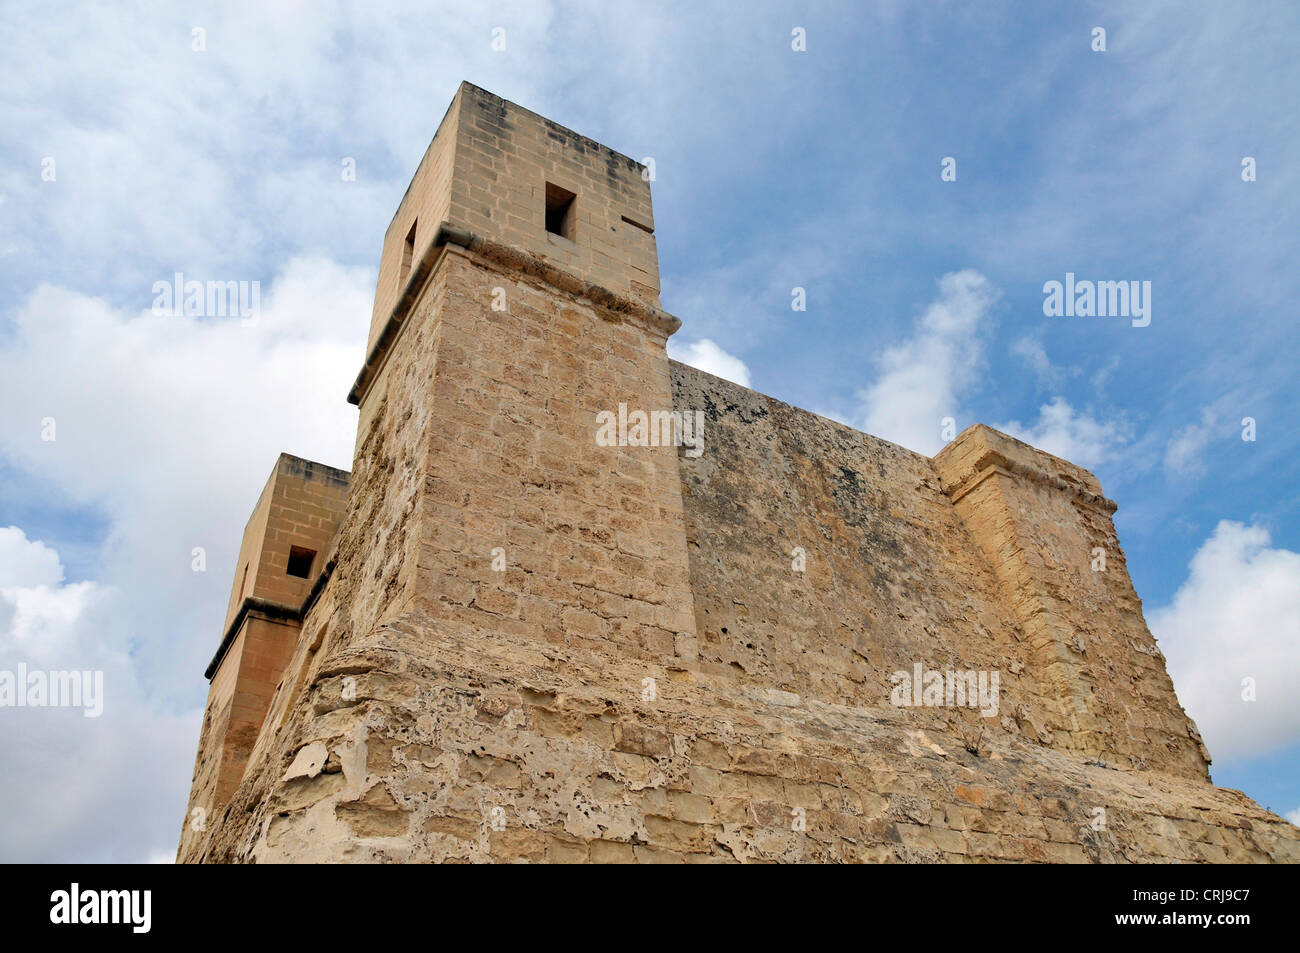 Very old tower from pauls bay on Malta with blue sky and clouds Stock Photo